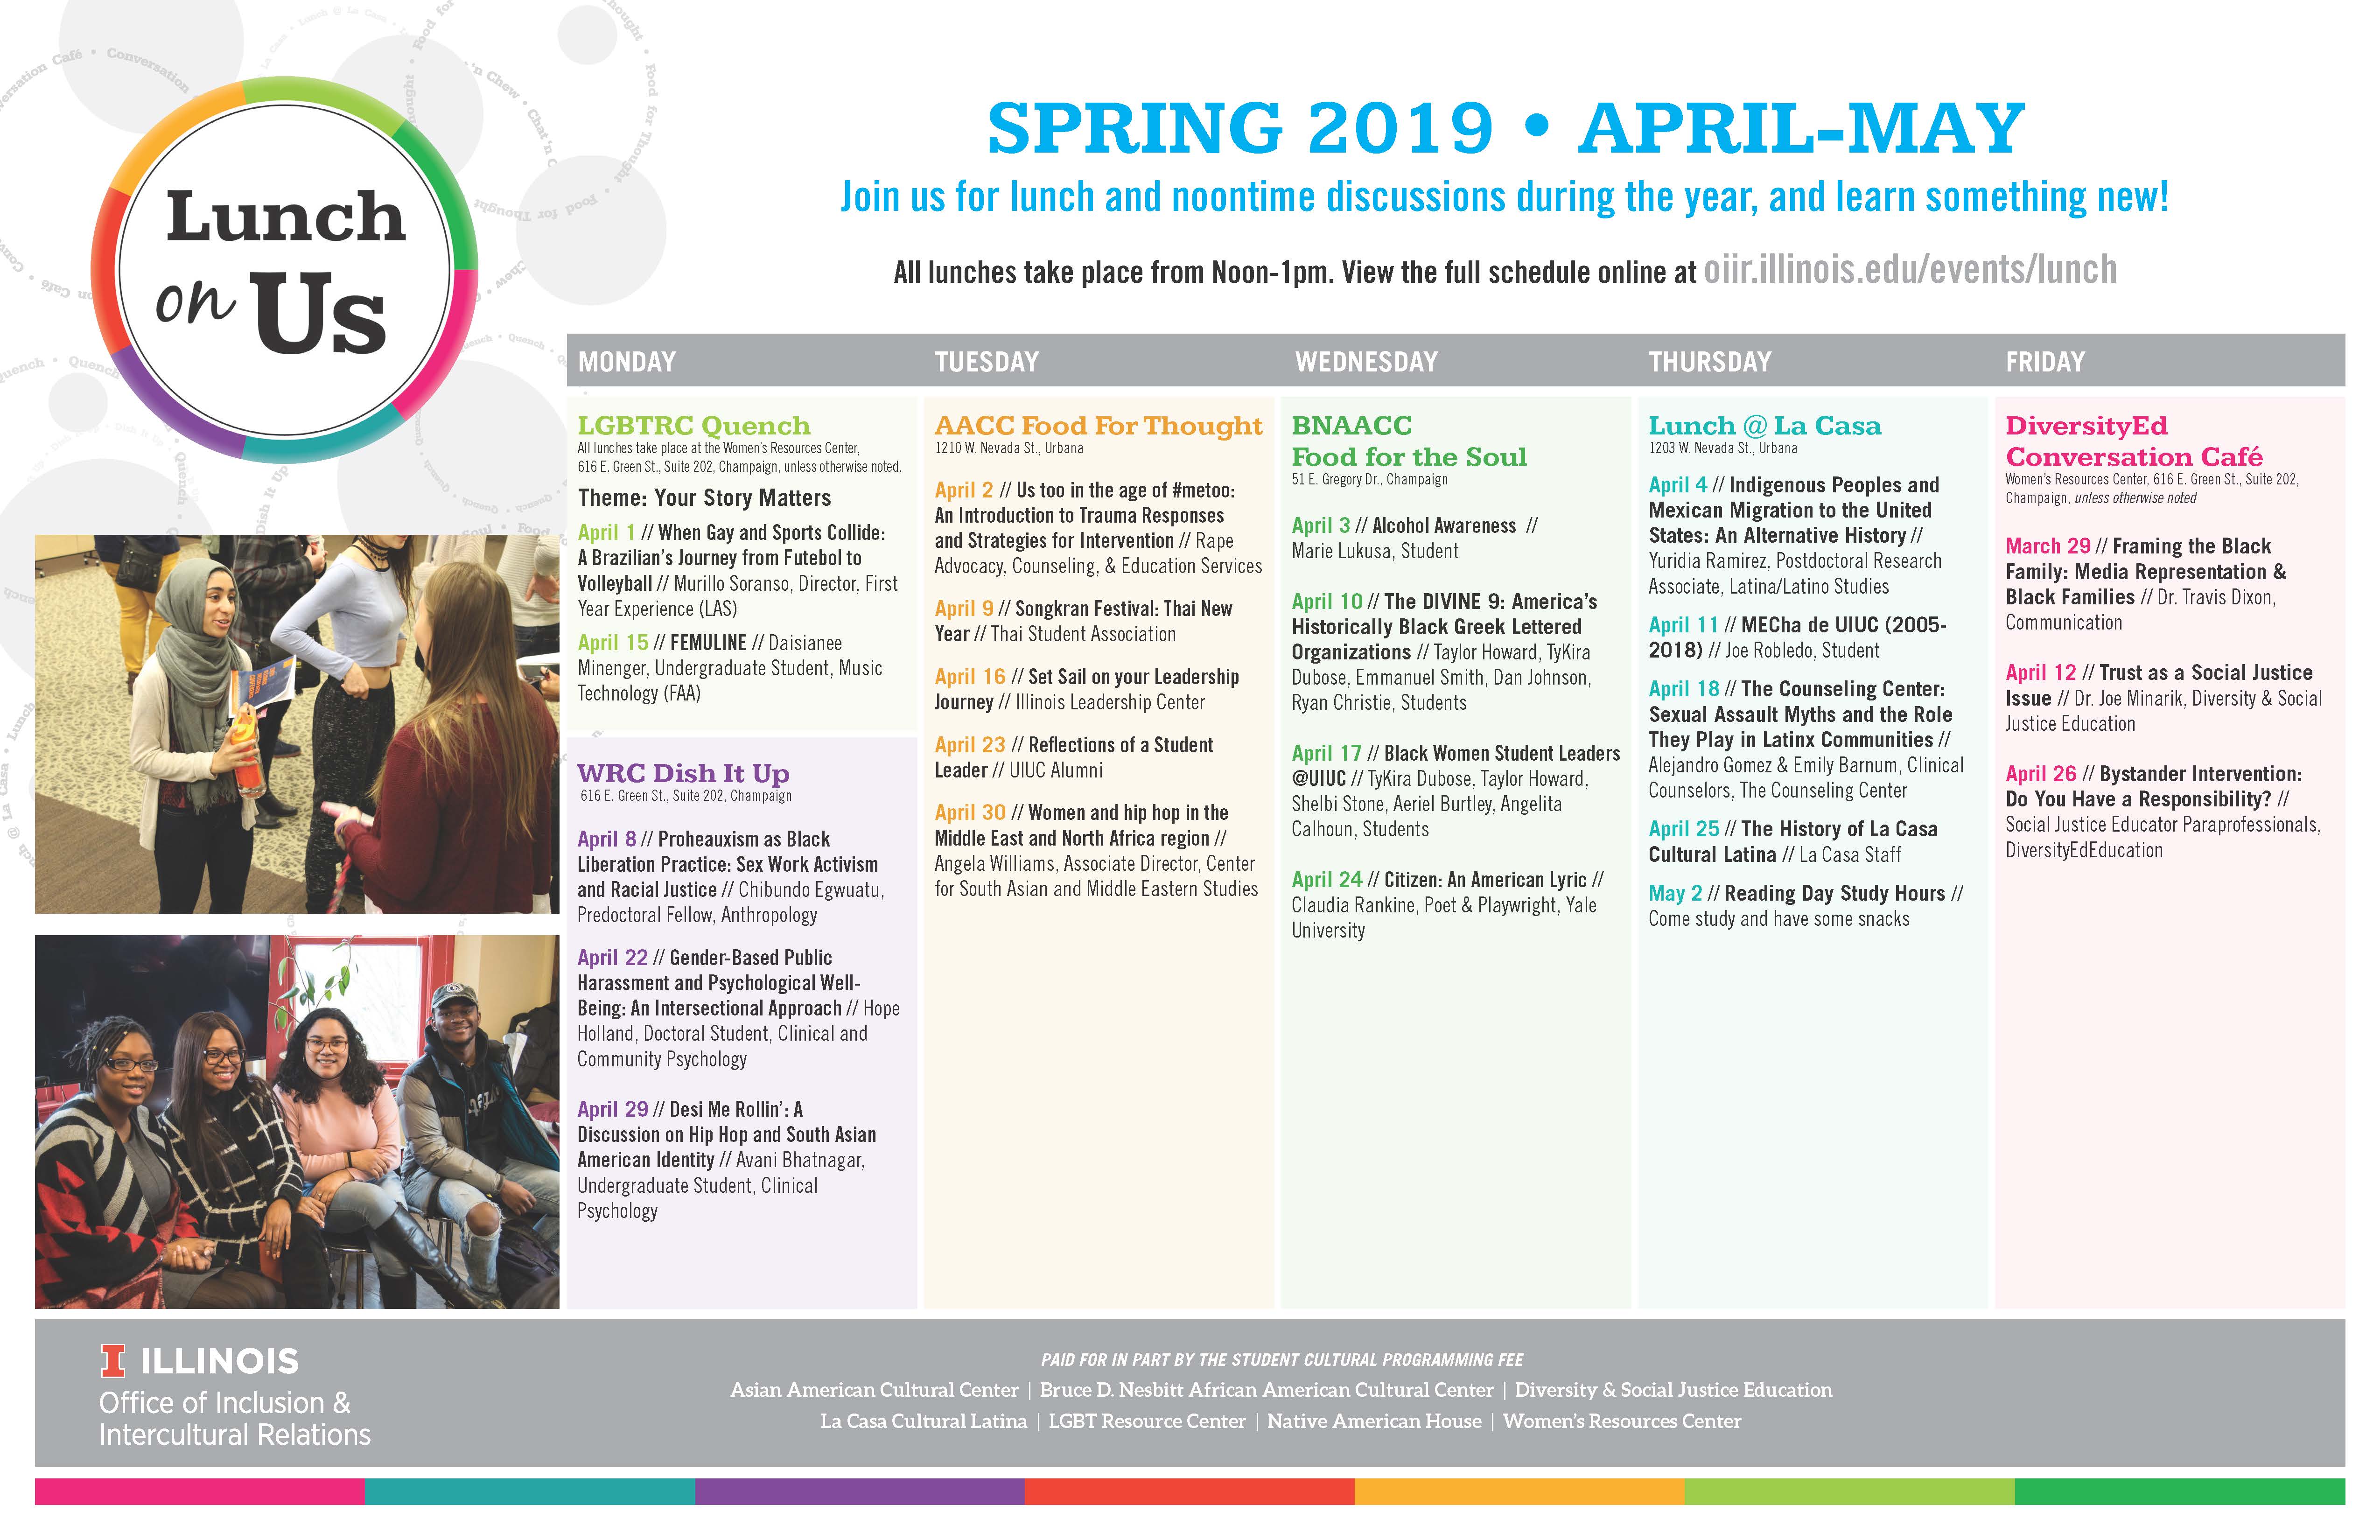 Spring2019_Calendar.jpg | Office of Inclusion and Intercultural